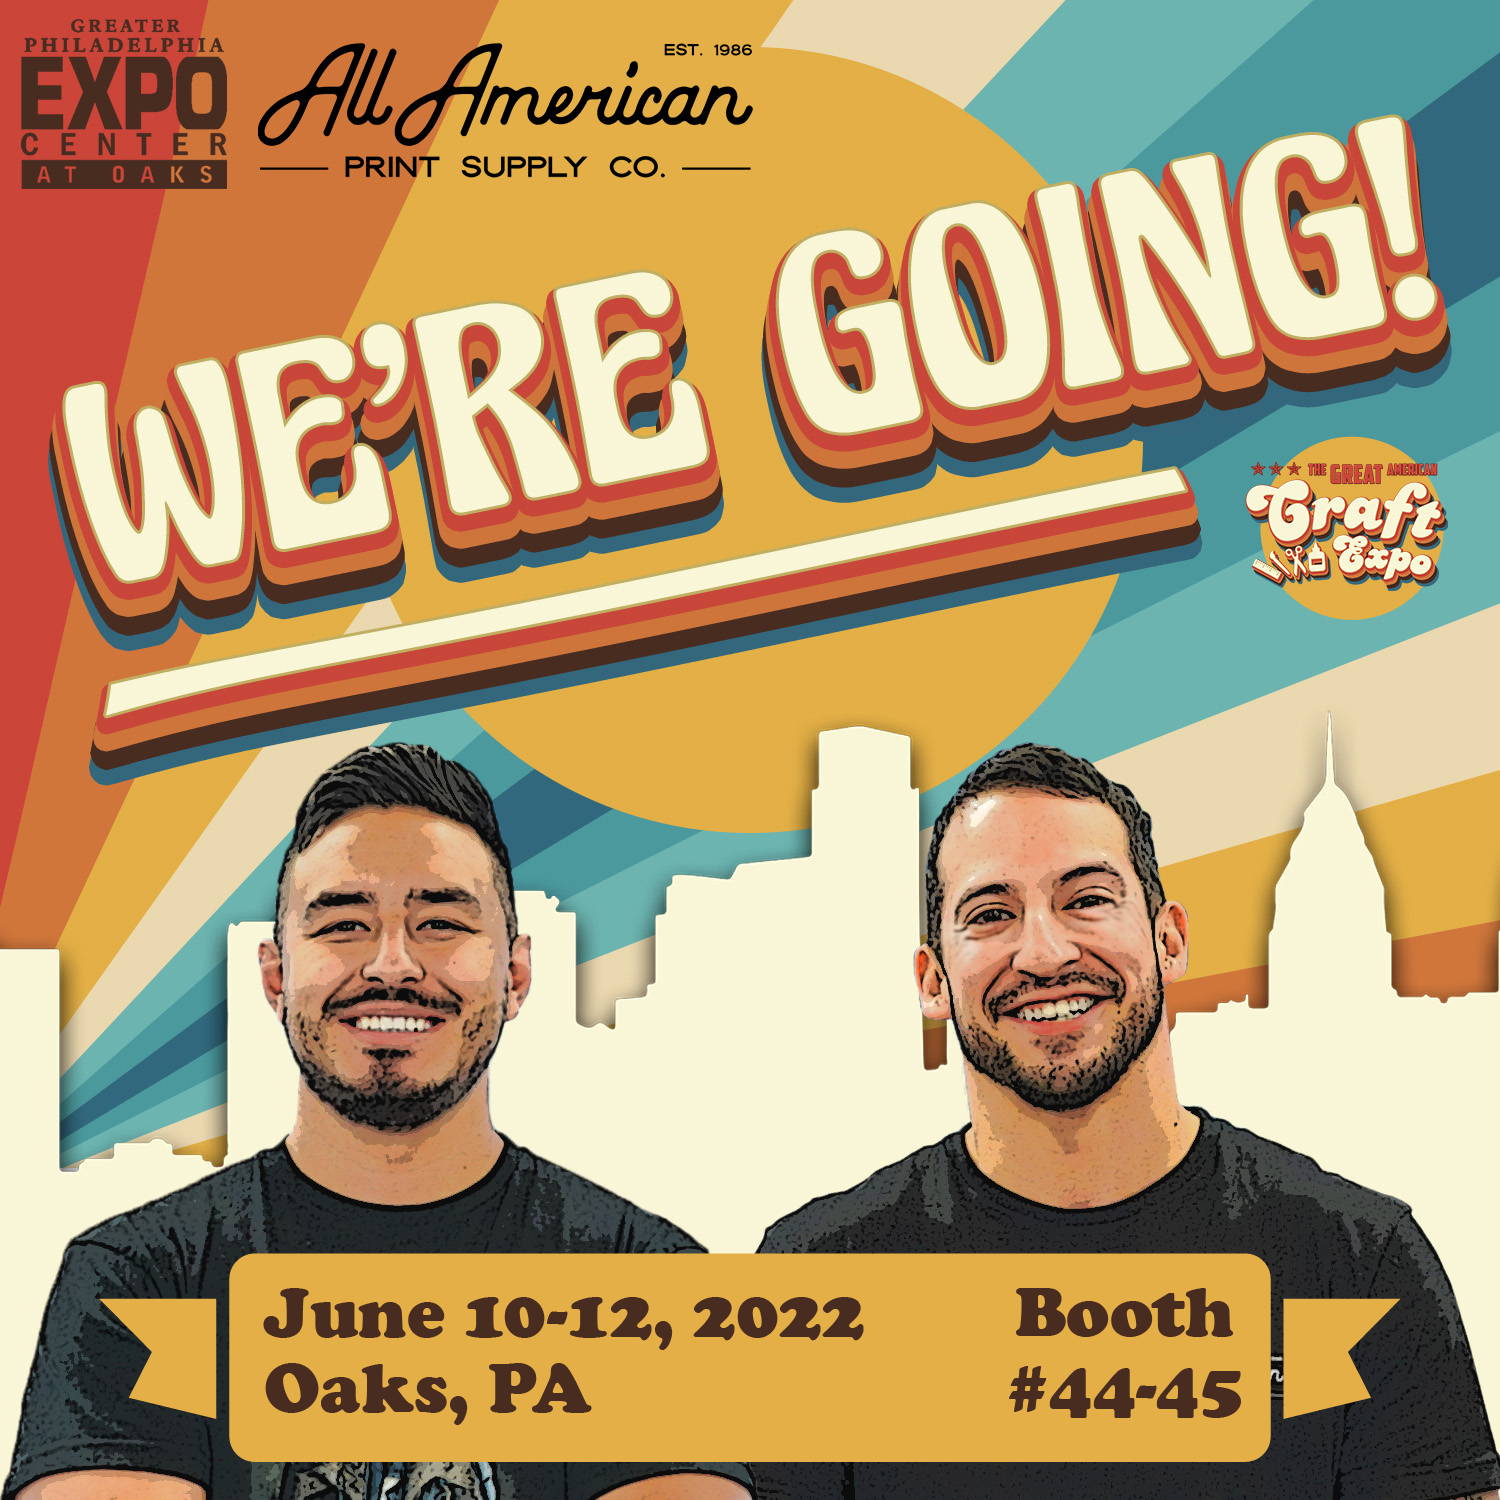 All American Print Supply Co. at The Great American Craft Expo on June 10-12, 2022 in Oaks, PA Booth #44-45. Exhibiting sublimation mugs and other crafting processes!